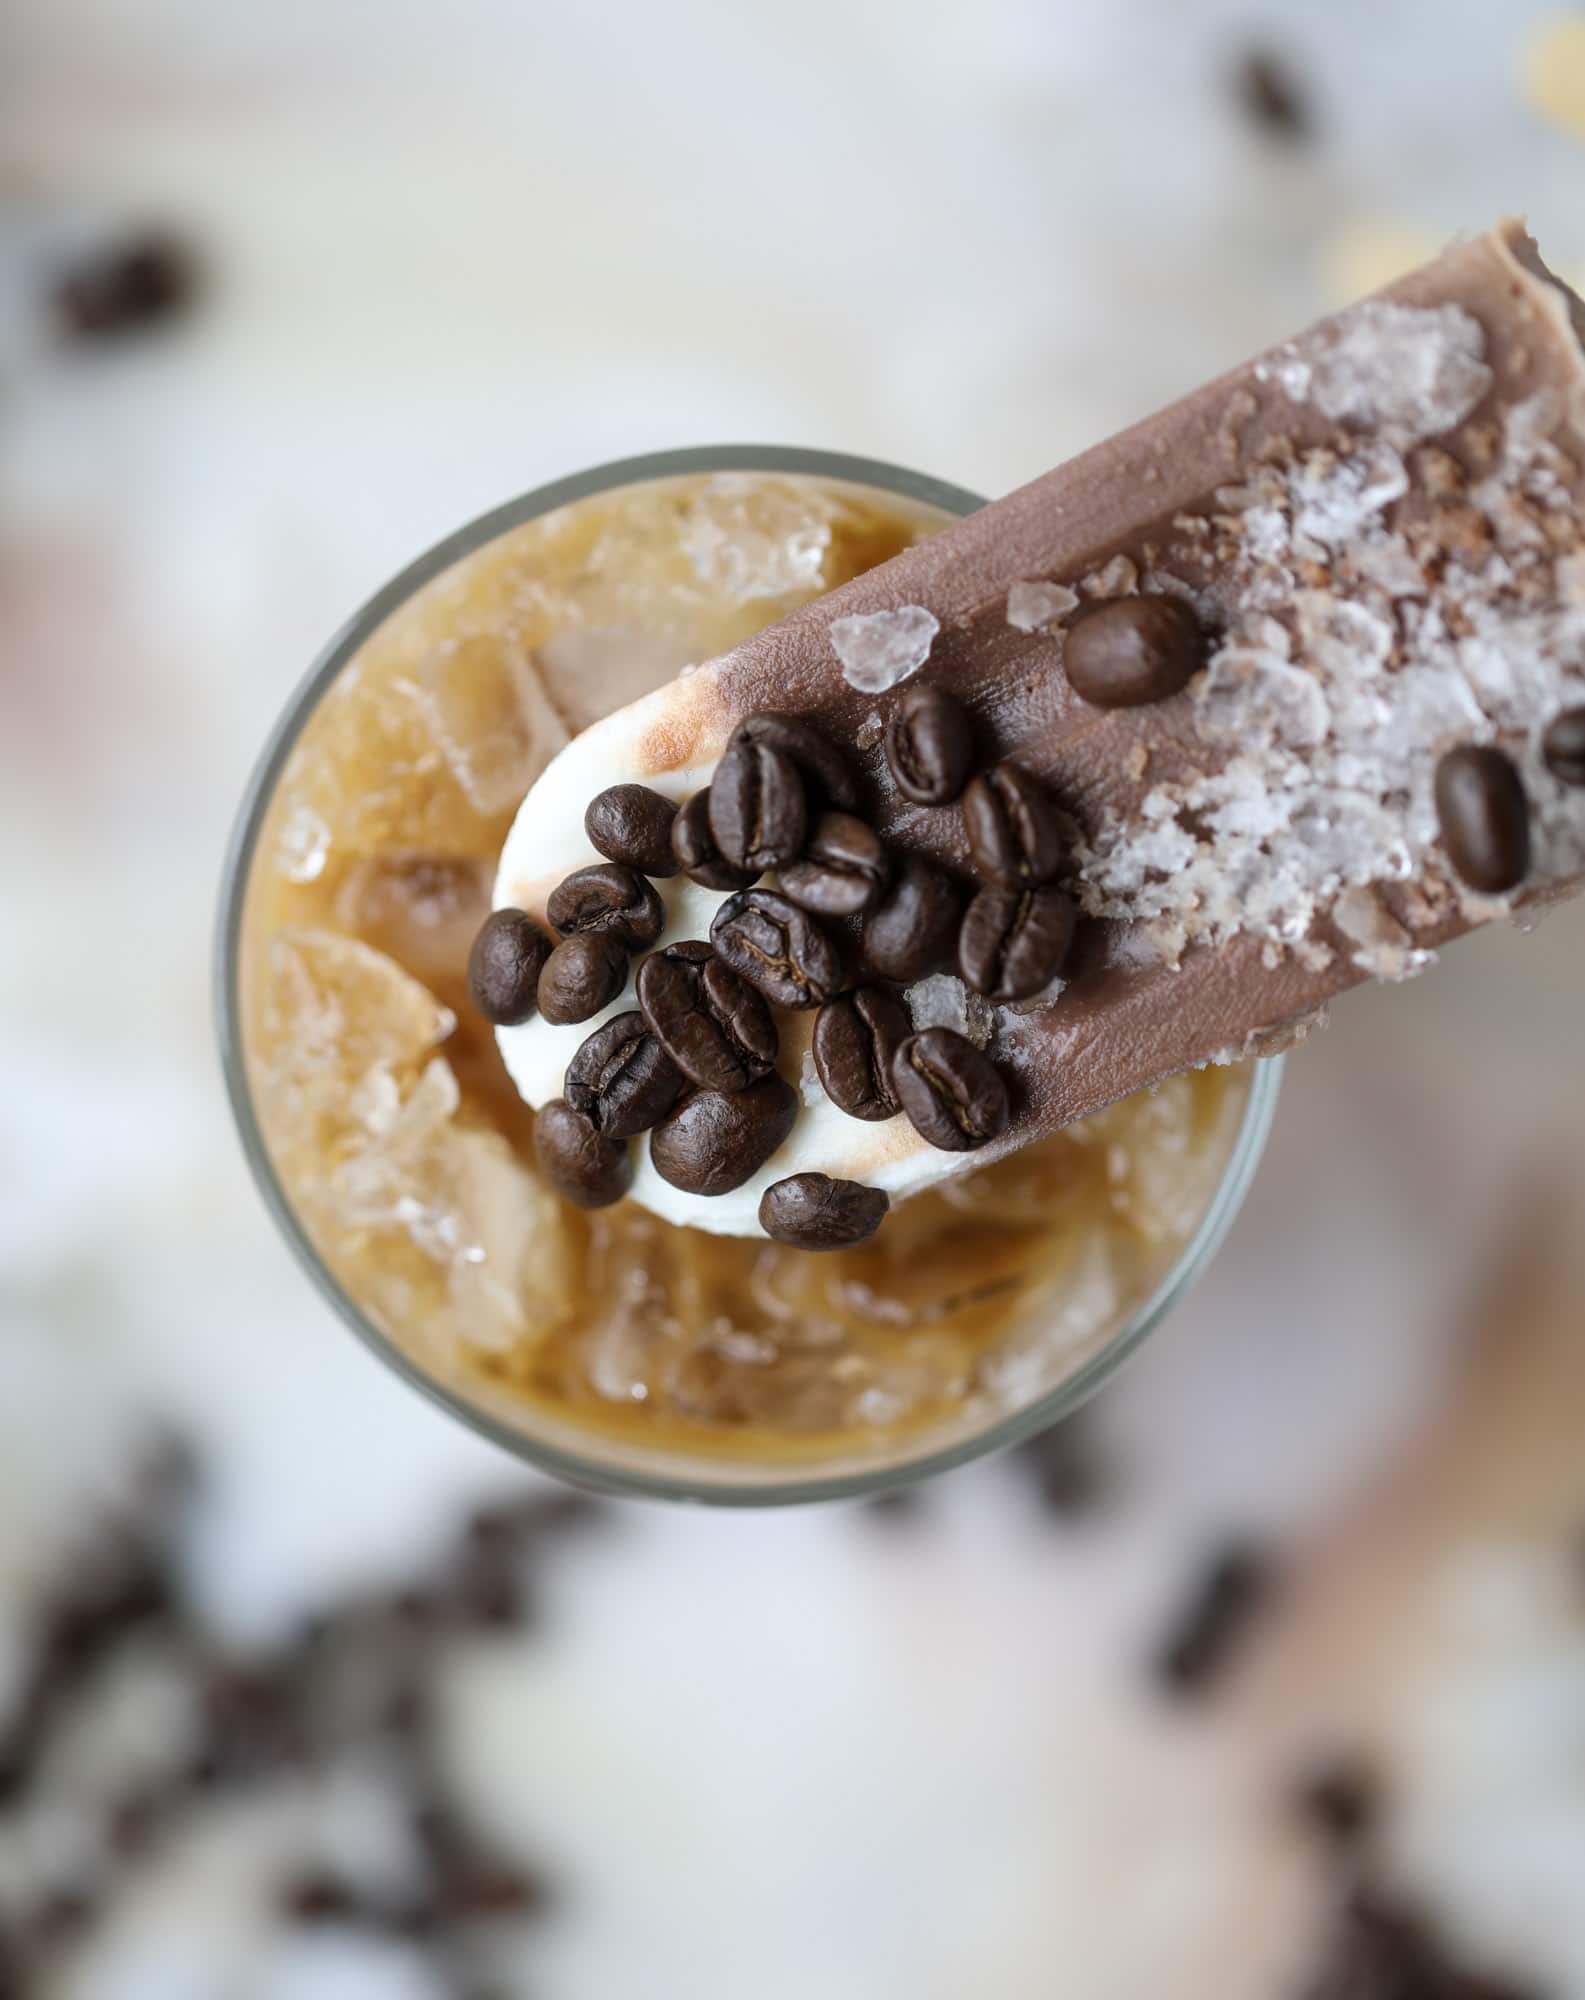 These fudgesicles are made with cold brew and dutch process cocoa for the most fun grown-up popsicle that can also deliver a little caffeine jolt. Topped with vanilla bean sweet cream, these are just like an iced latte in a pop! Serve as a treat or a snack! I howsweeteats.com #coldbrew #coffee #sweet #cream #popsicle #fudgesicle